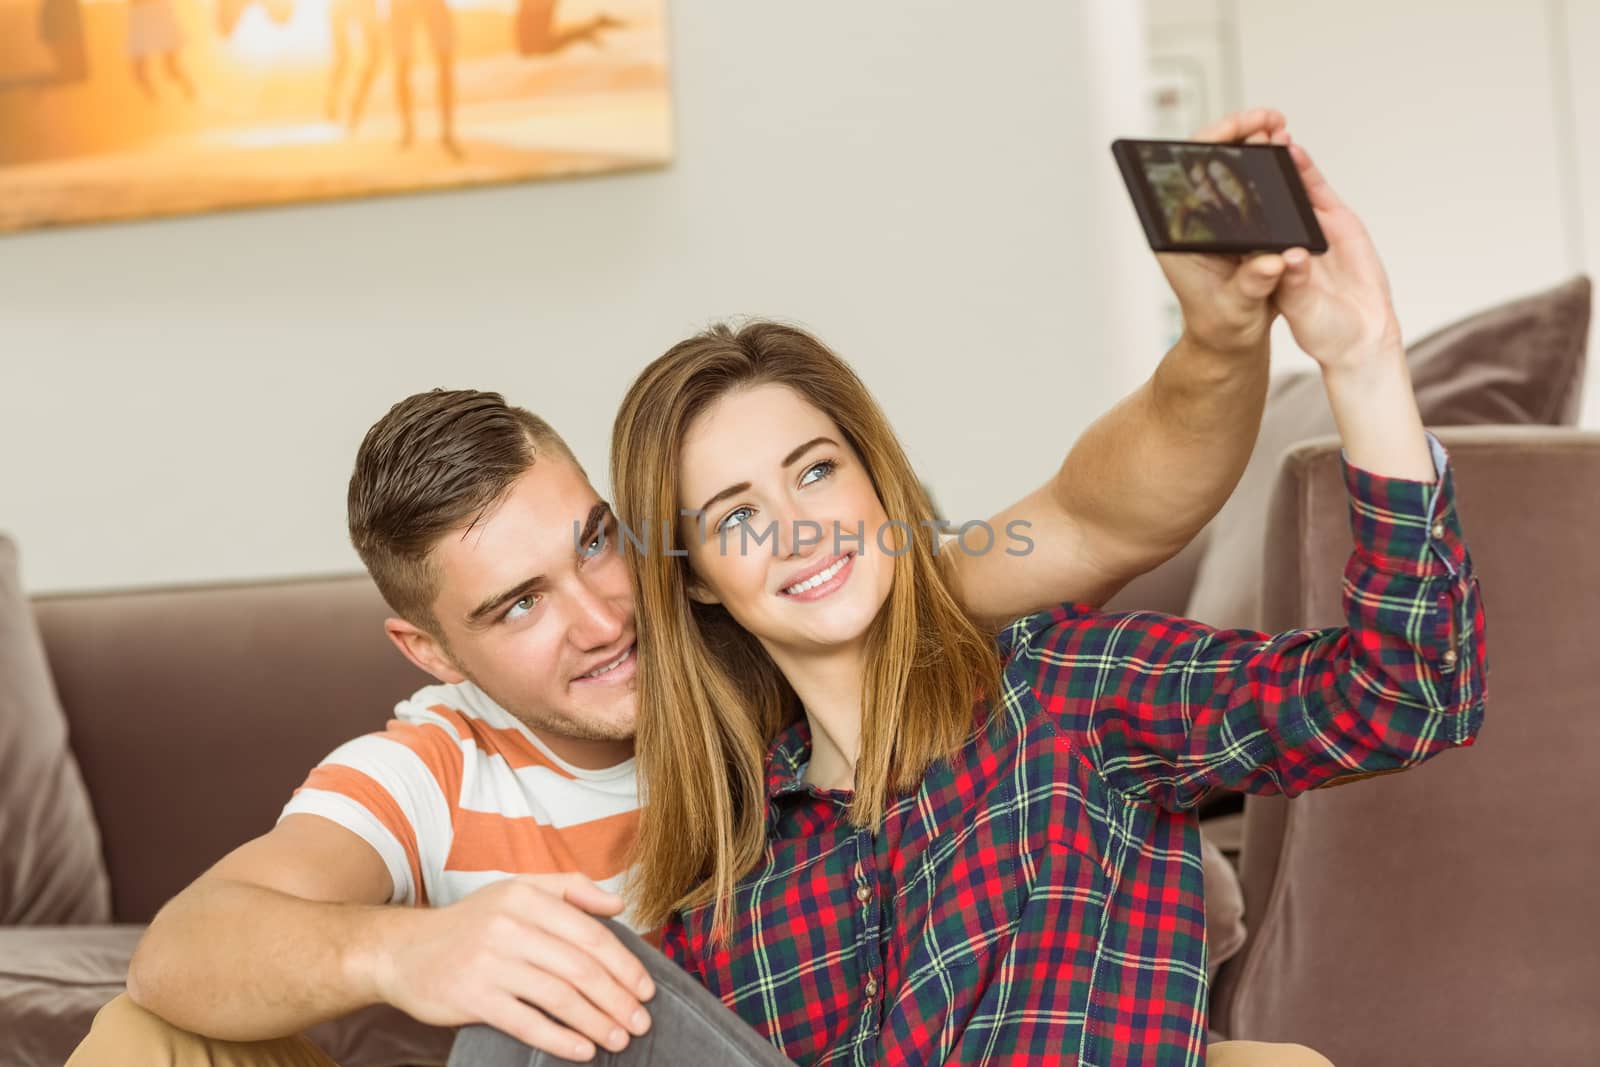 Cute couple taking a selfie at home in the living room